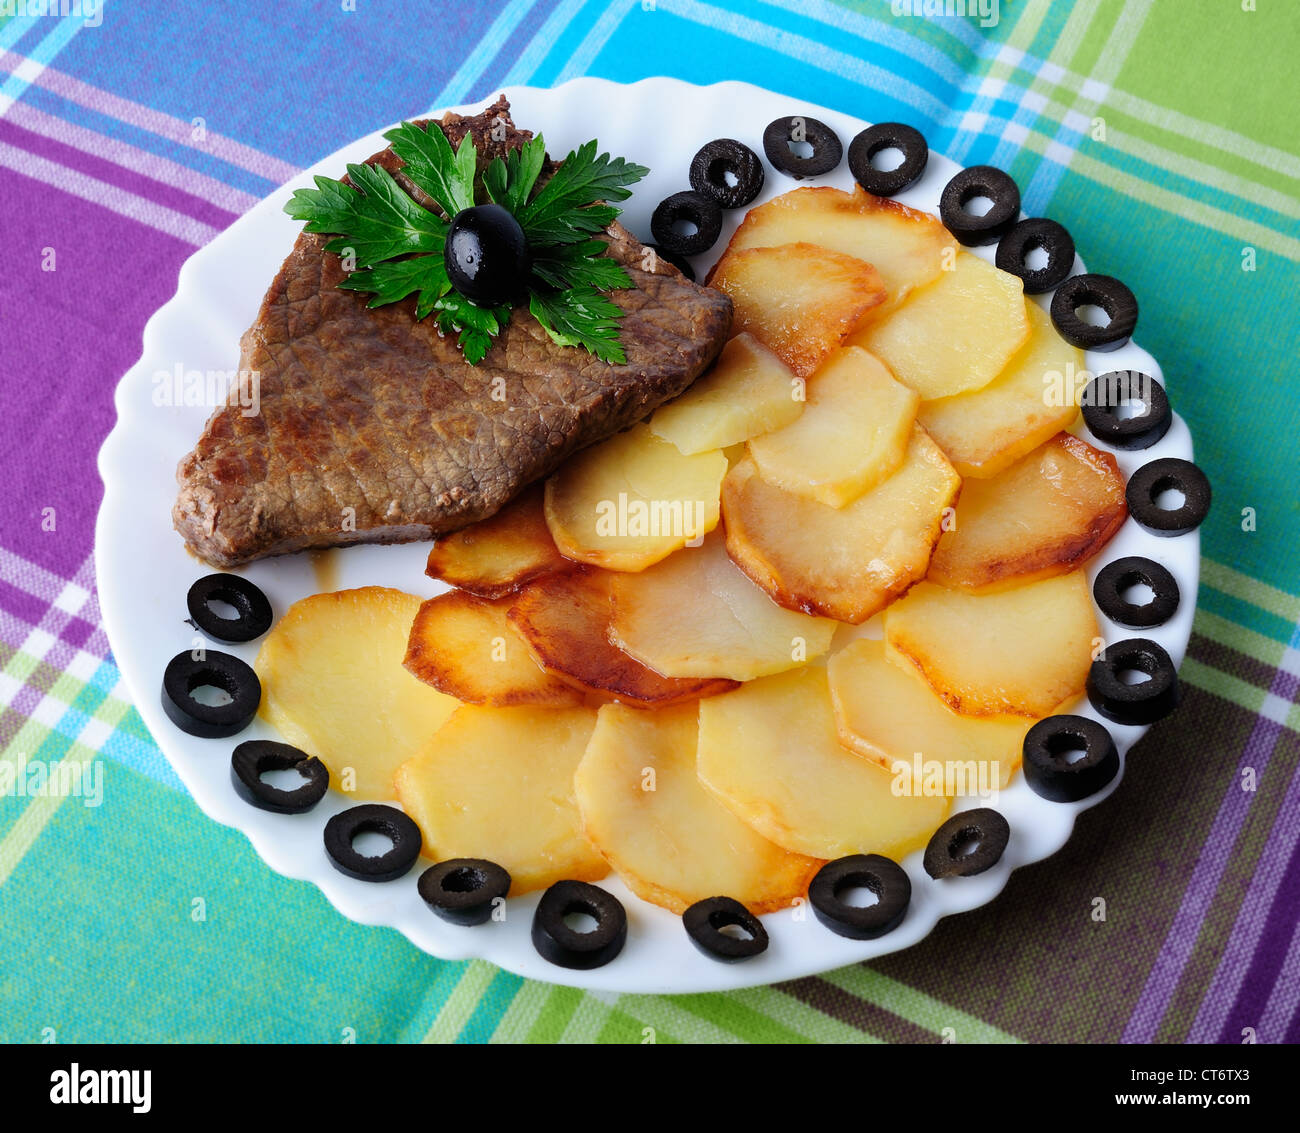 Veal with fried potatoes on a plate Stock Photo